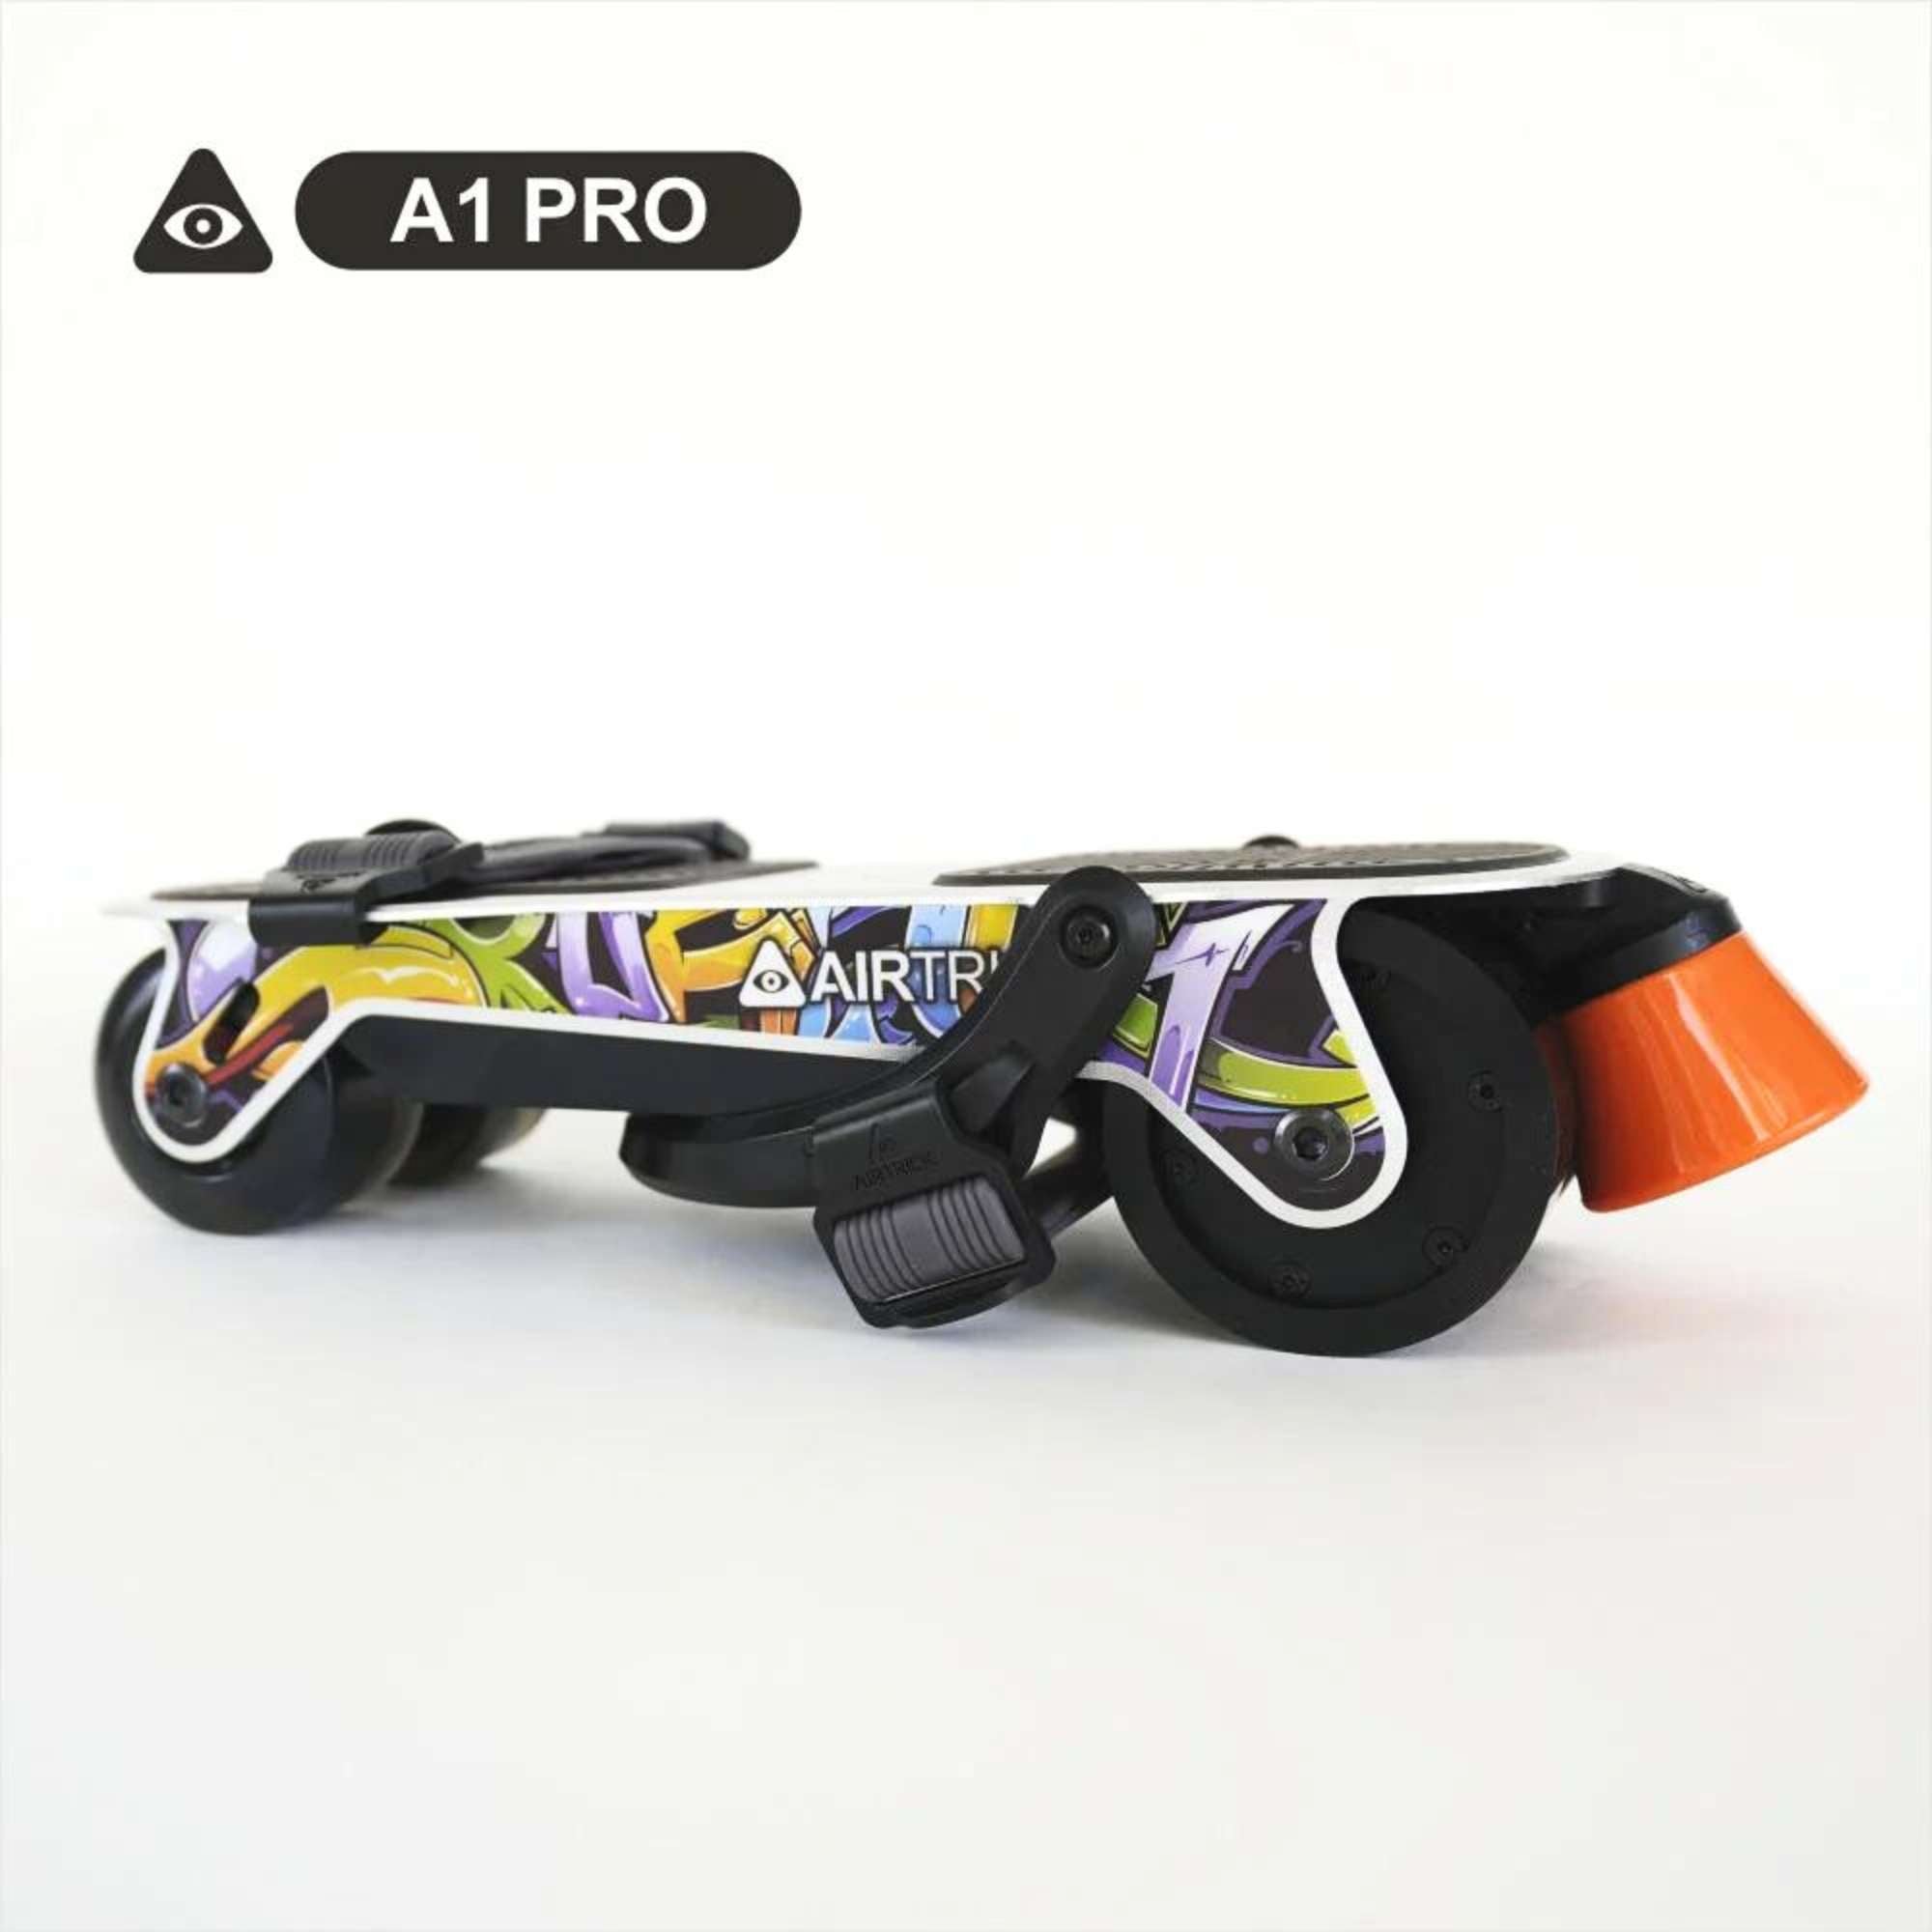 Airtrick Electric Roller Skates | Motorized Rollerblades